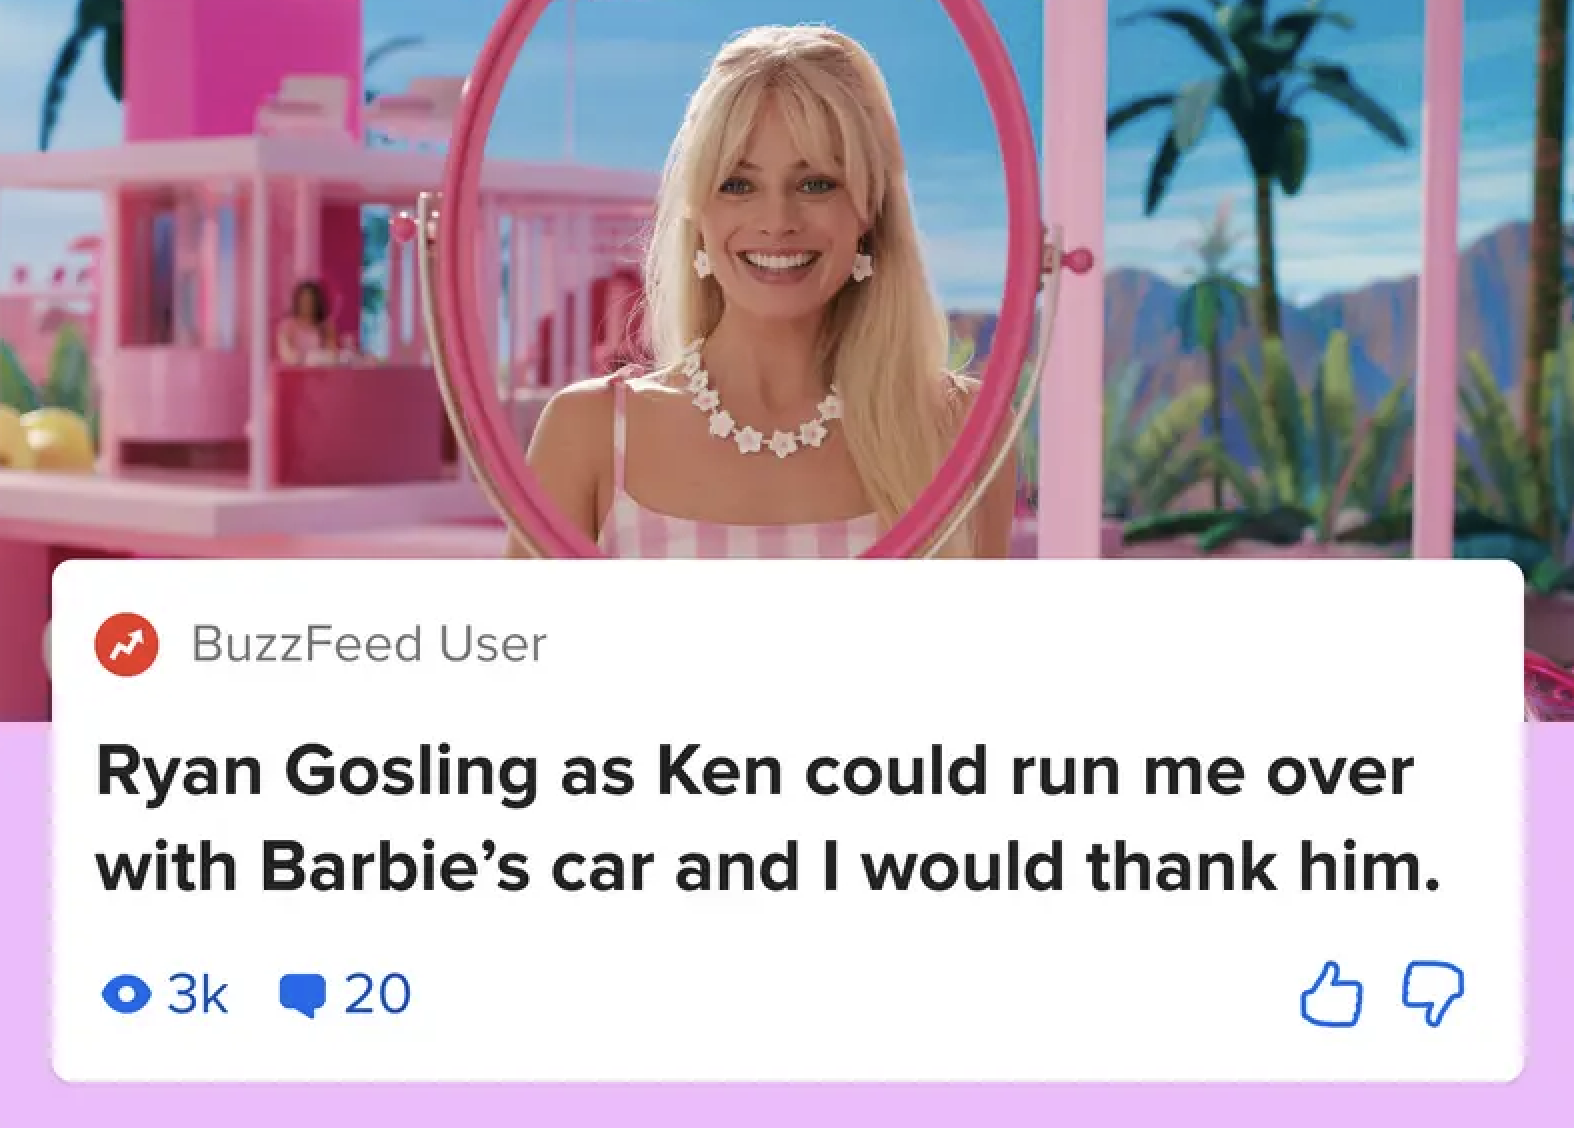 One person commented, &quot;Ryan Gosling as Ken could run me over with Barbie&#x27;s car and I would thank him&quot;